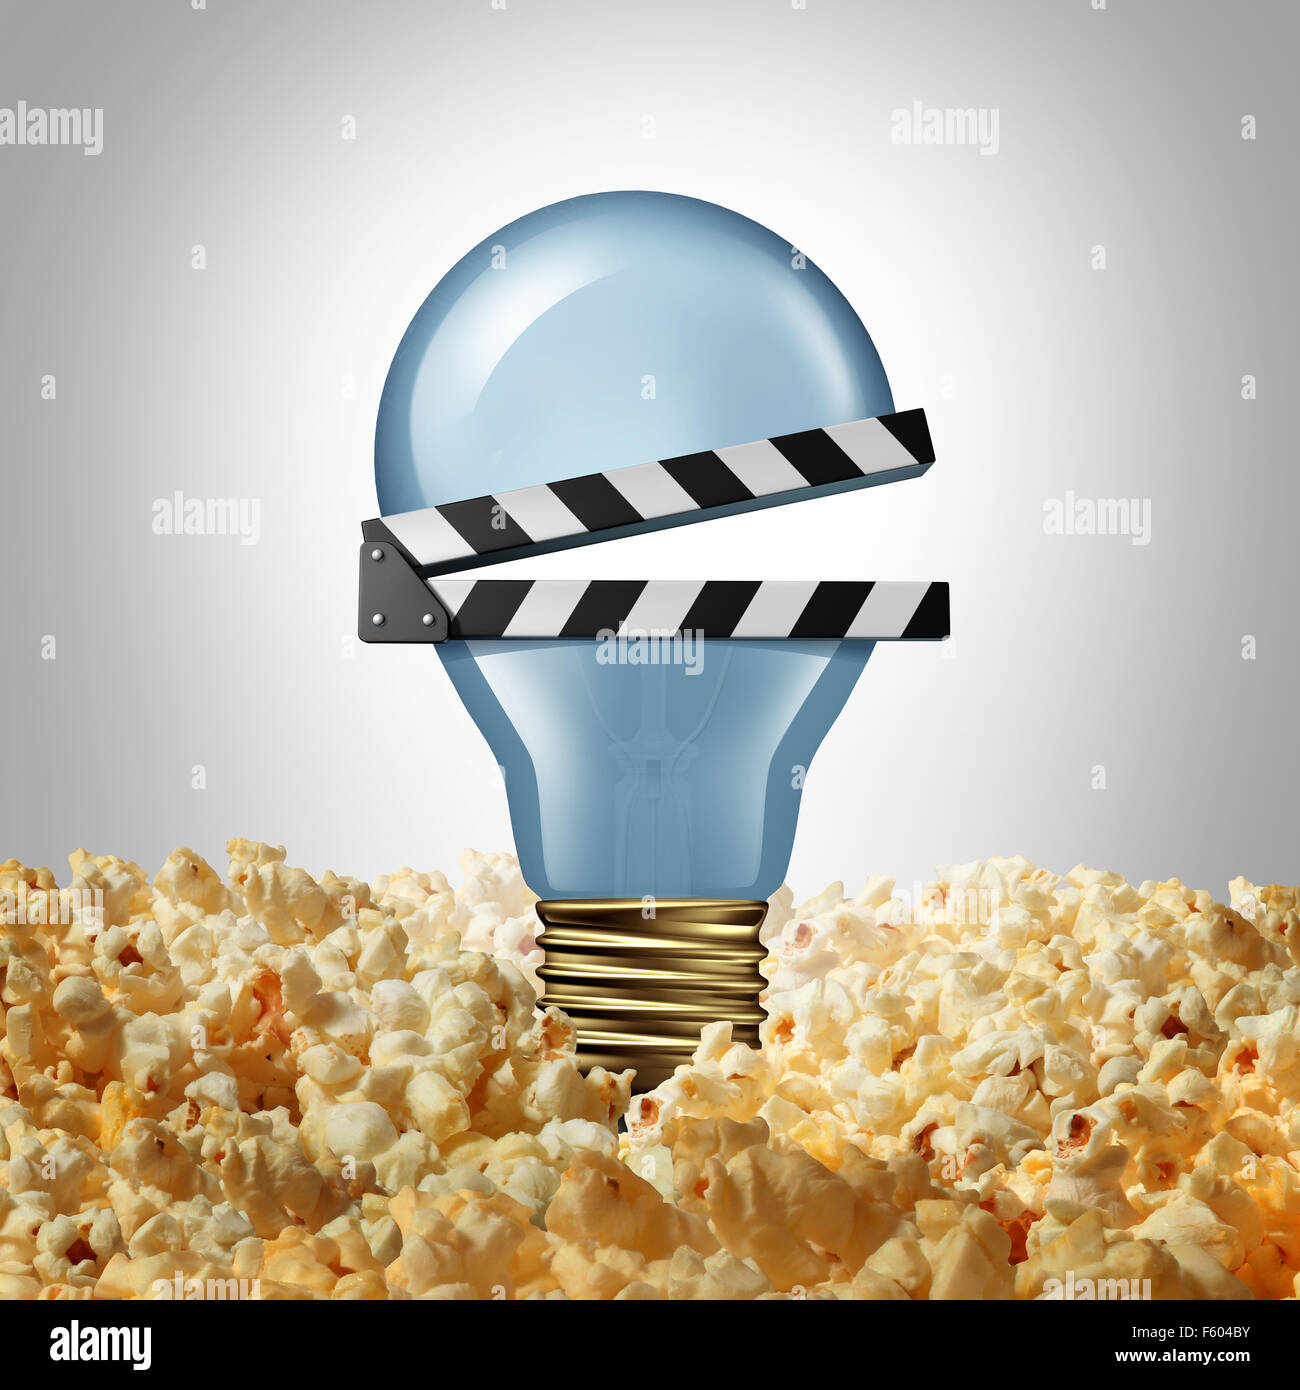 Movie idea concept and cinema creativity symbol as a light bulb or lightbulb in popcorn shaped as an open clap board or video slate as a metaphor for finding new entertainment ideas. Stock Photo